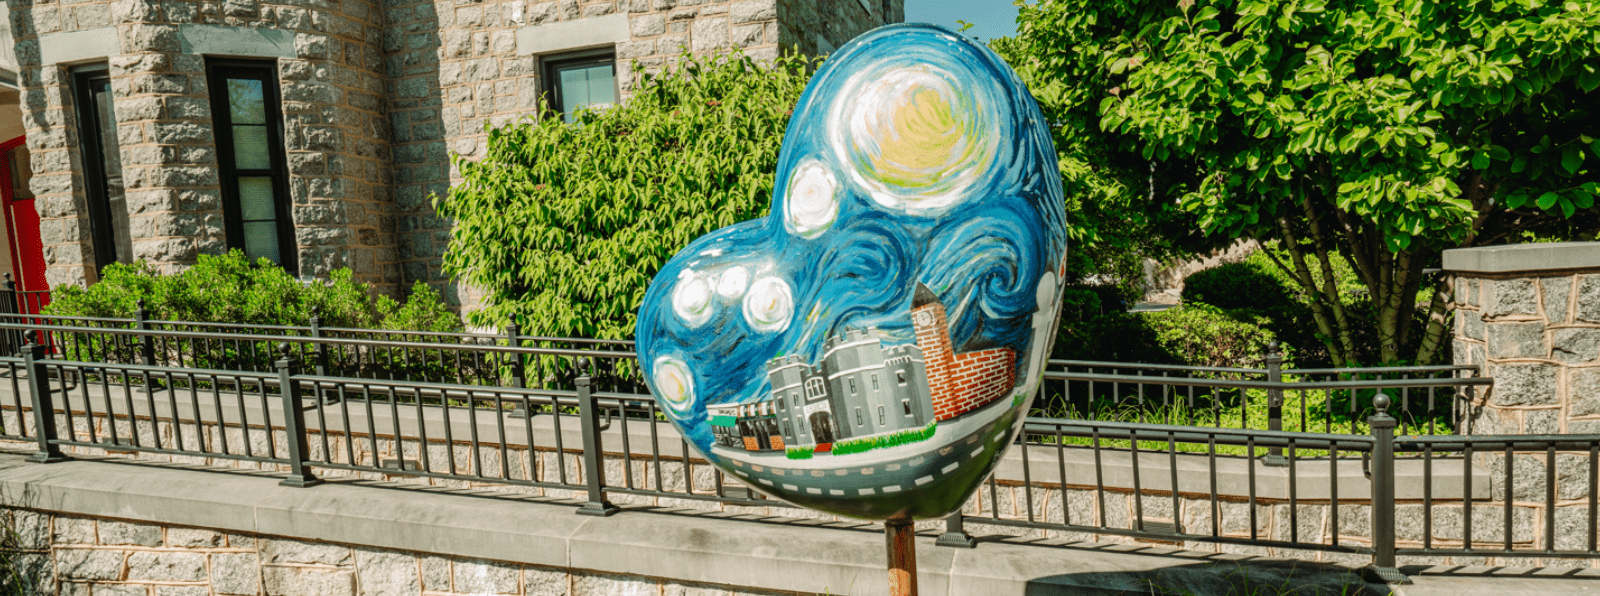 Heart shaped sculpture with a building and sky painted on it in front of a brick building